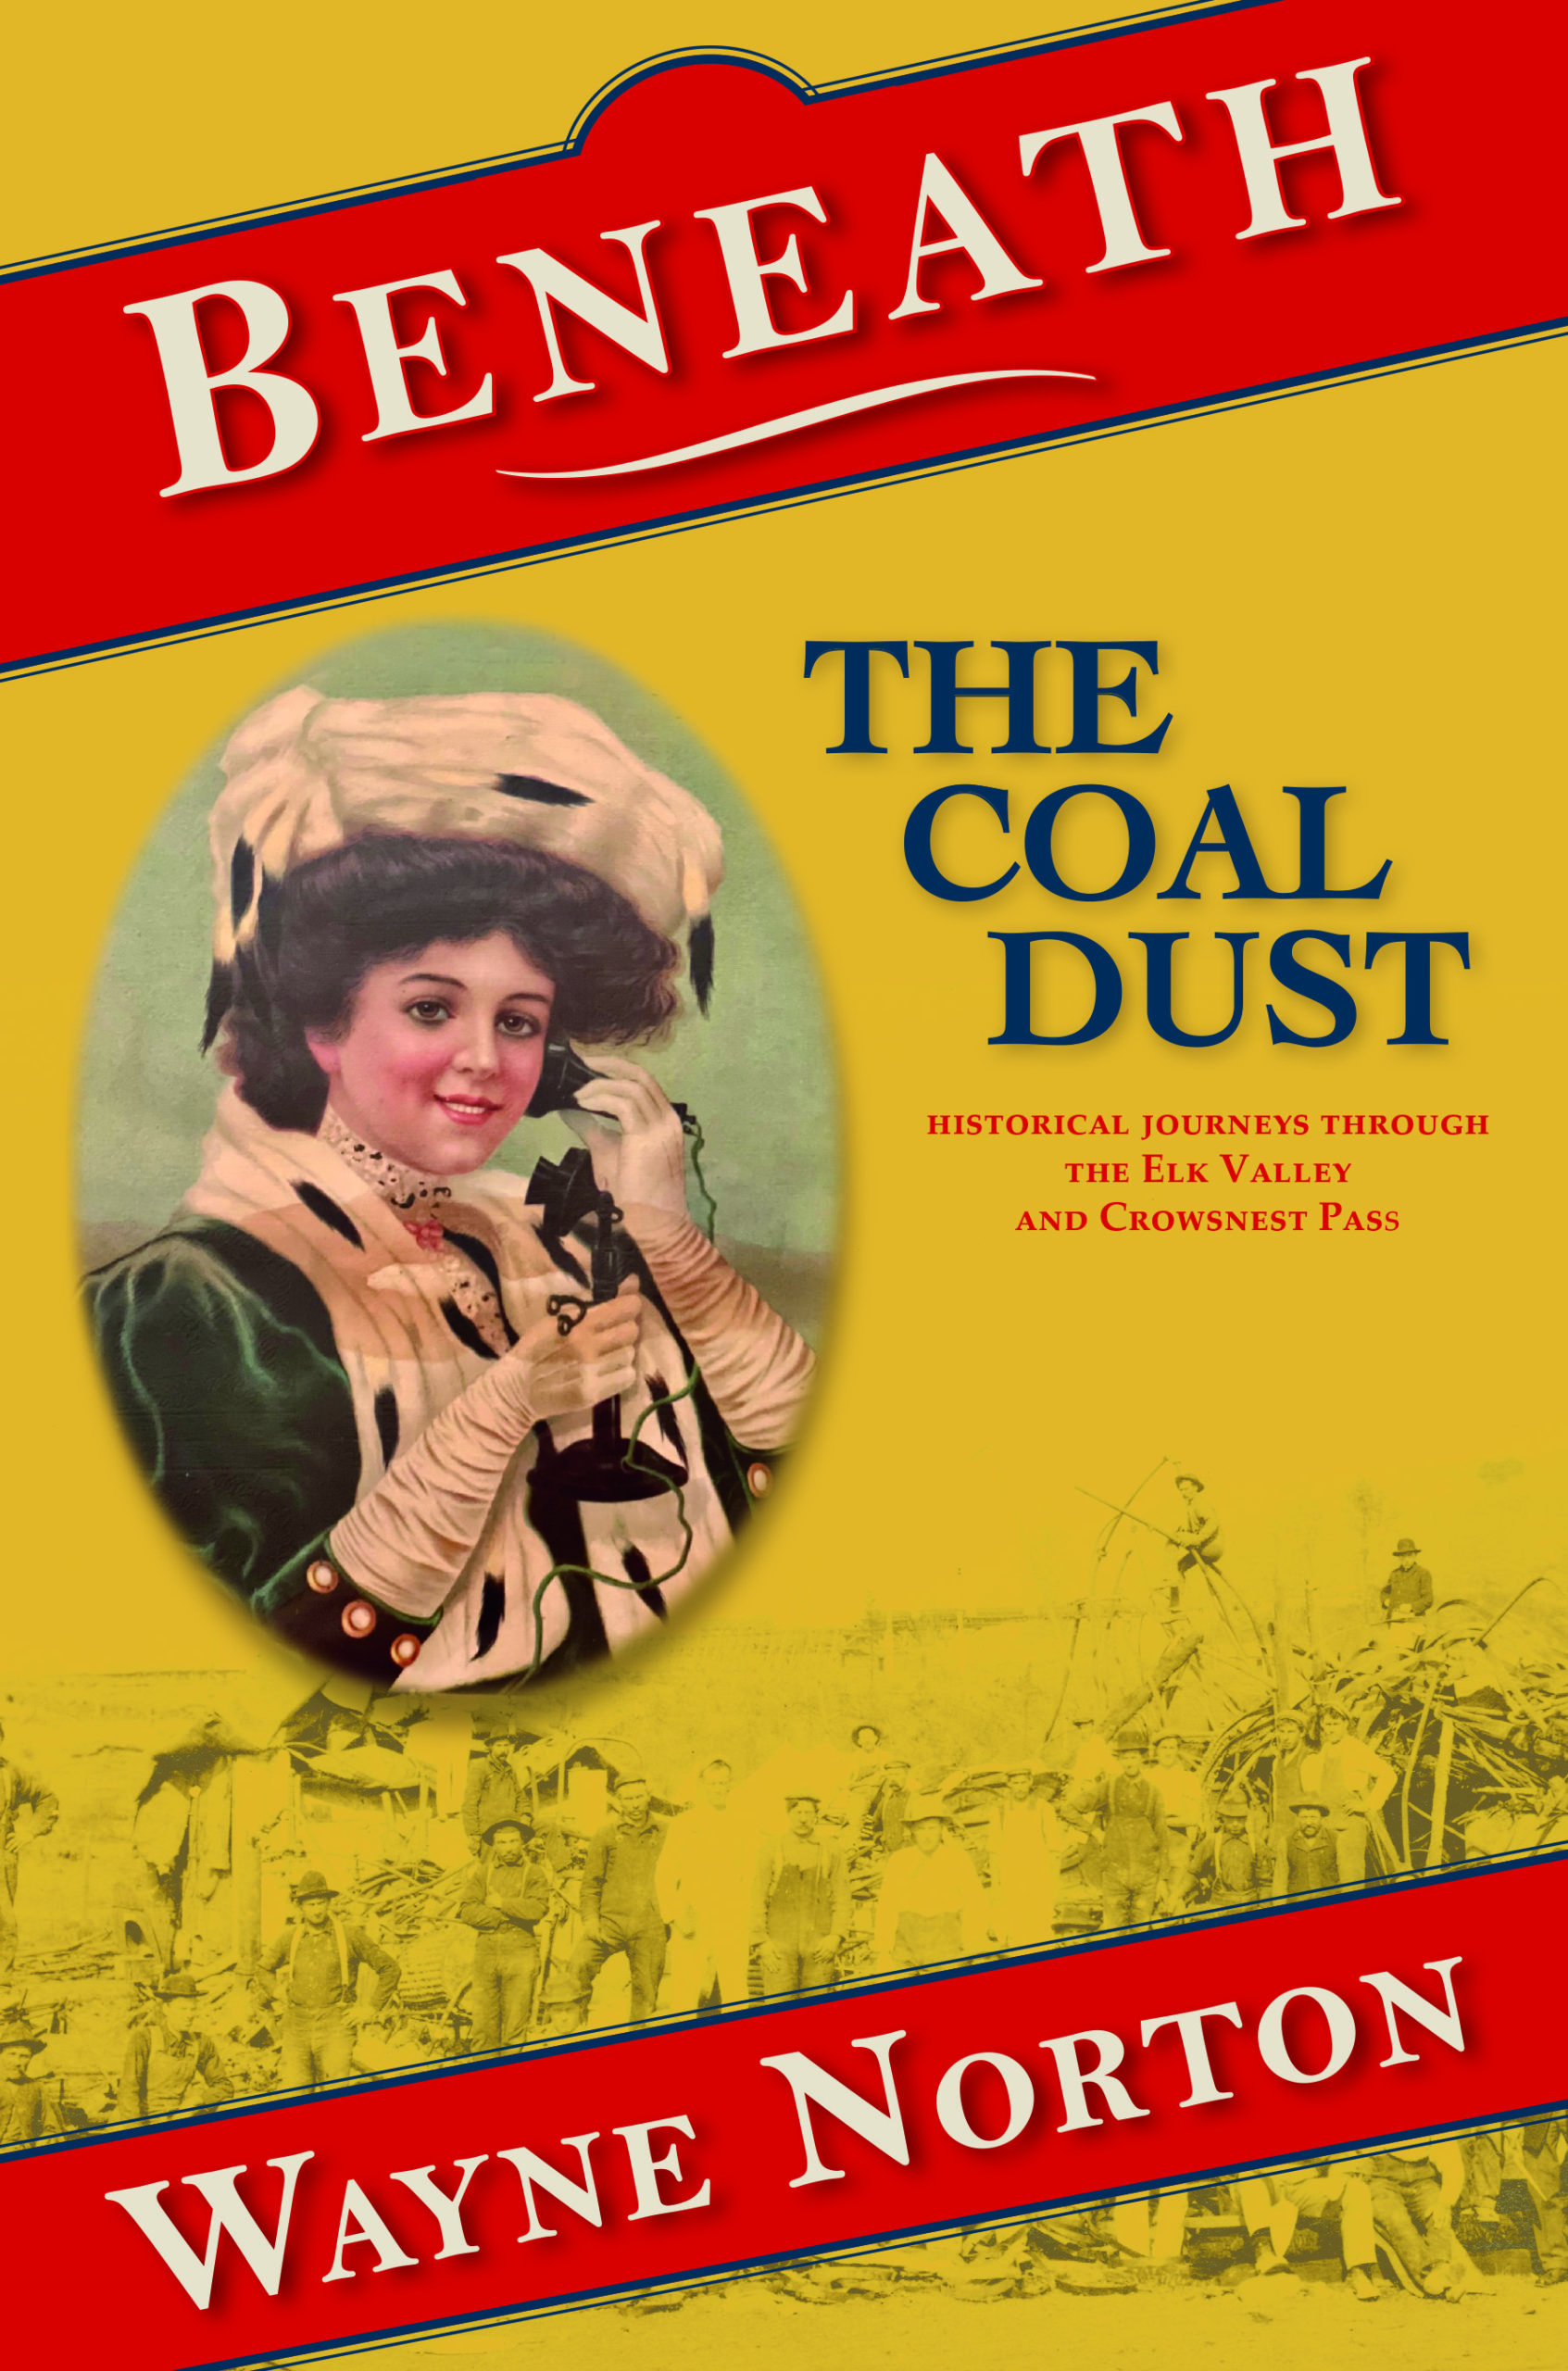 Beneath the Coal Dust - Official Book Launch